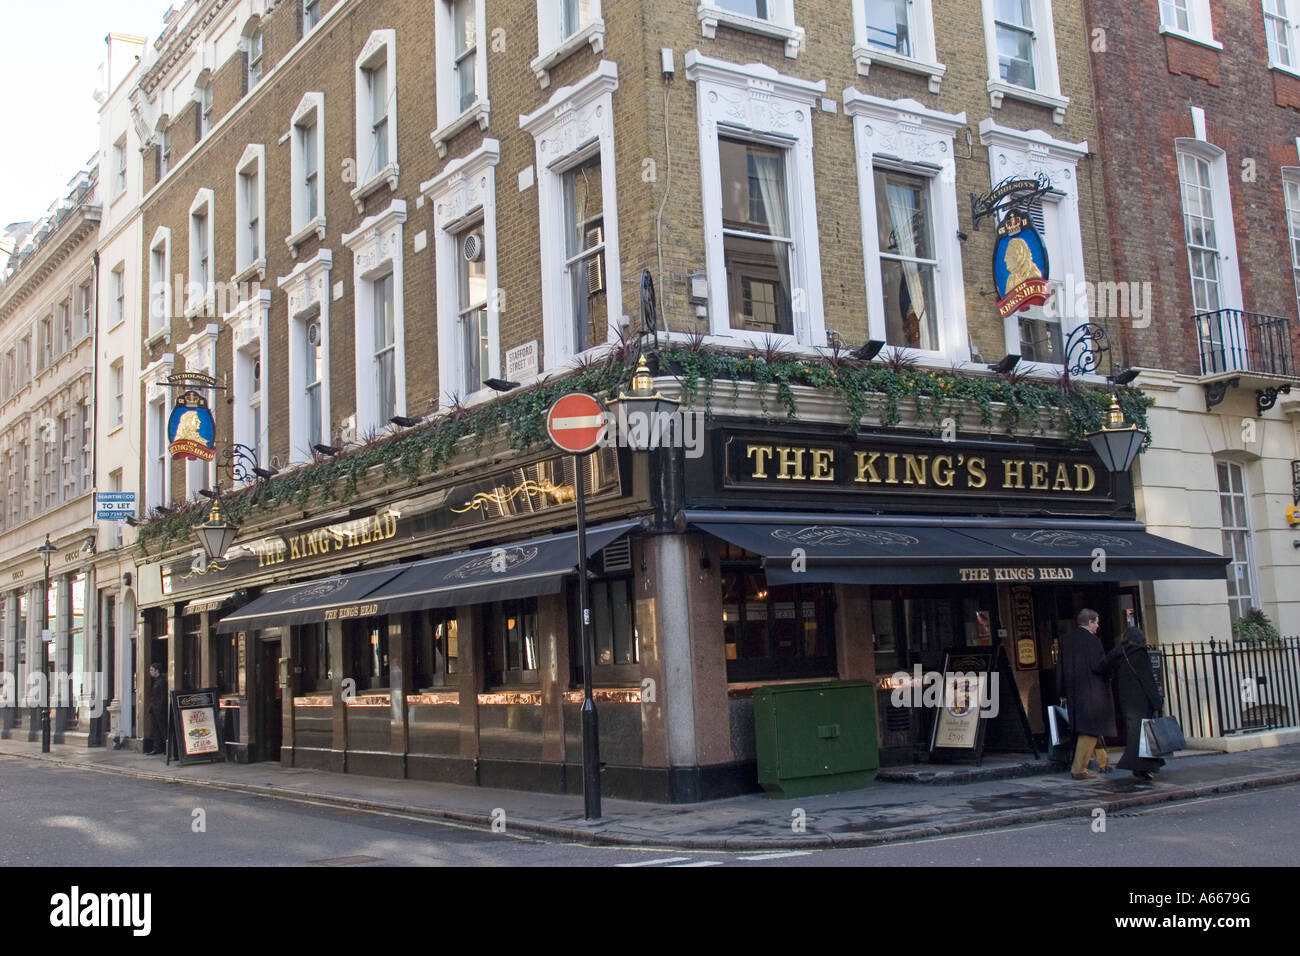 The Kings Head Public house, on the corner of Albemarle Street and Sutton Street London GB UK Stock Photo